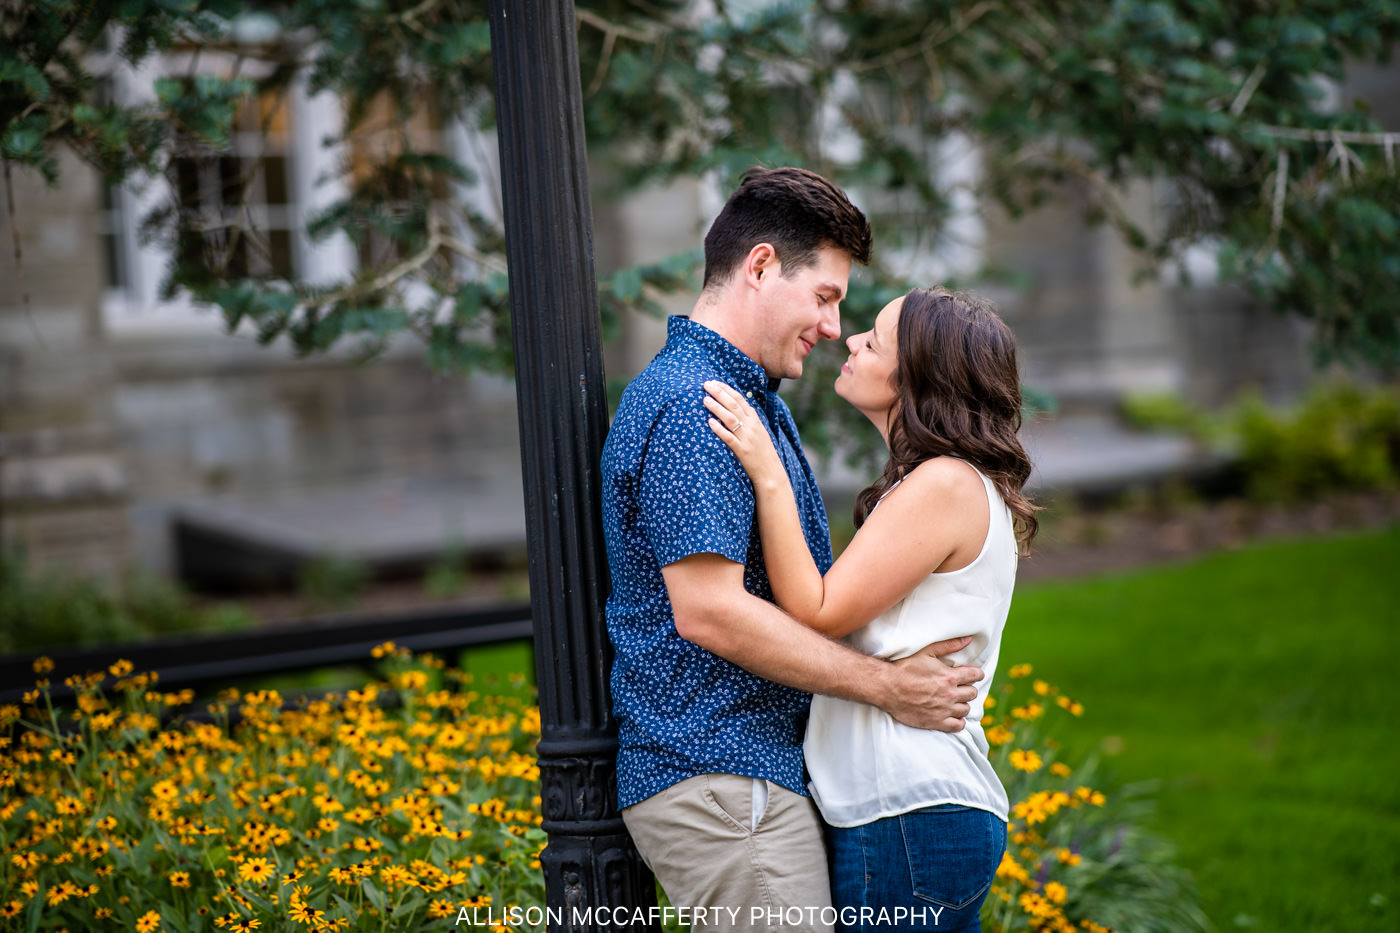 Engagement Photography at West Chester University